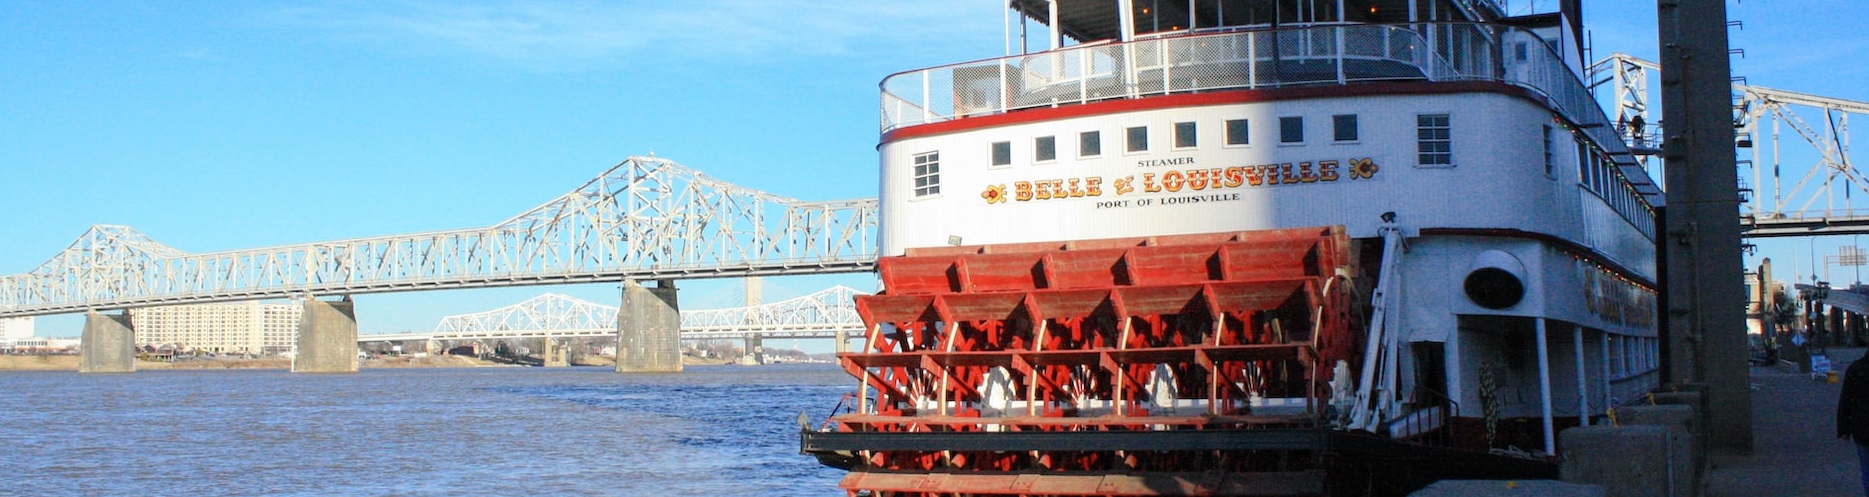 Riverboat in Louisville | Breast Cancer Car Donations